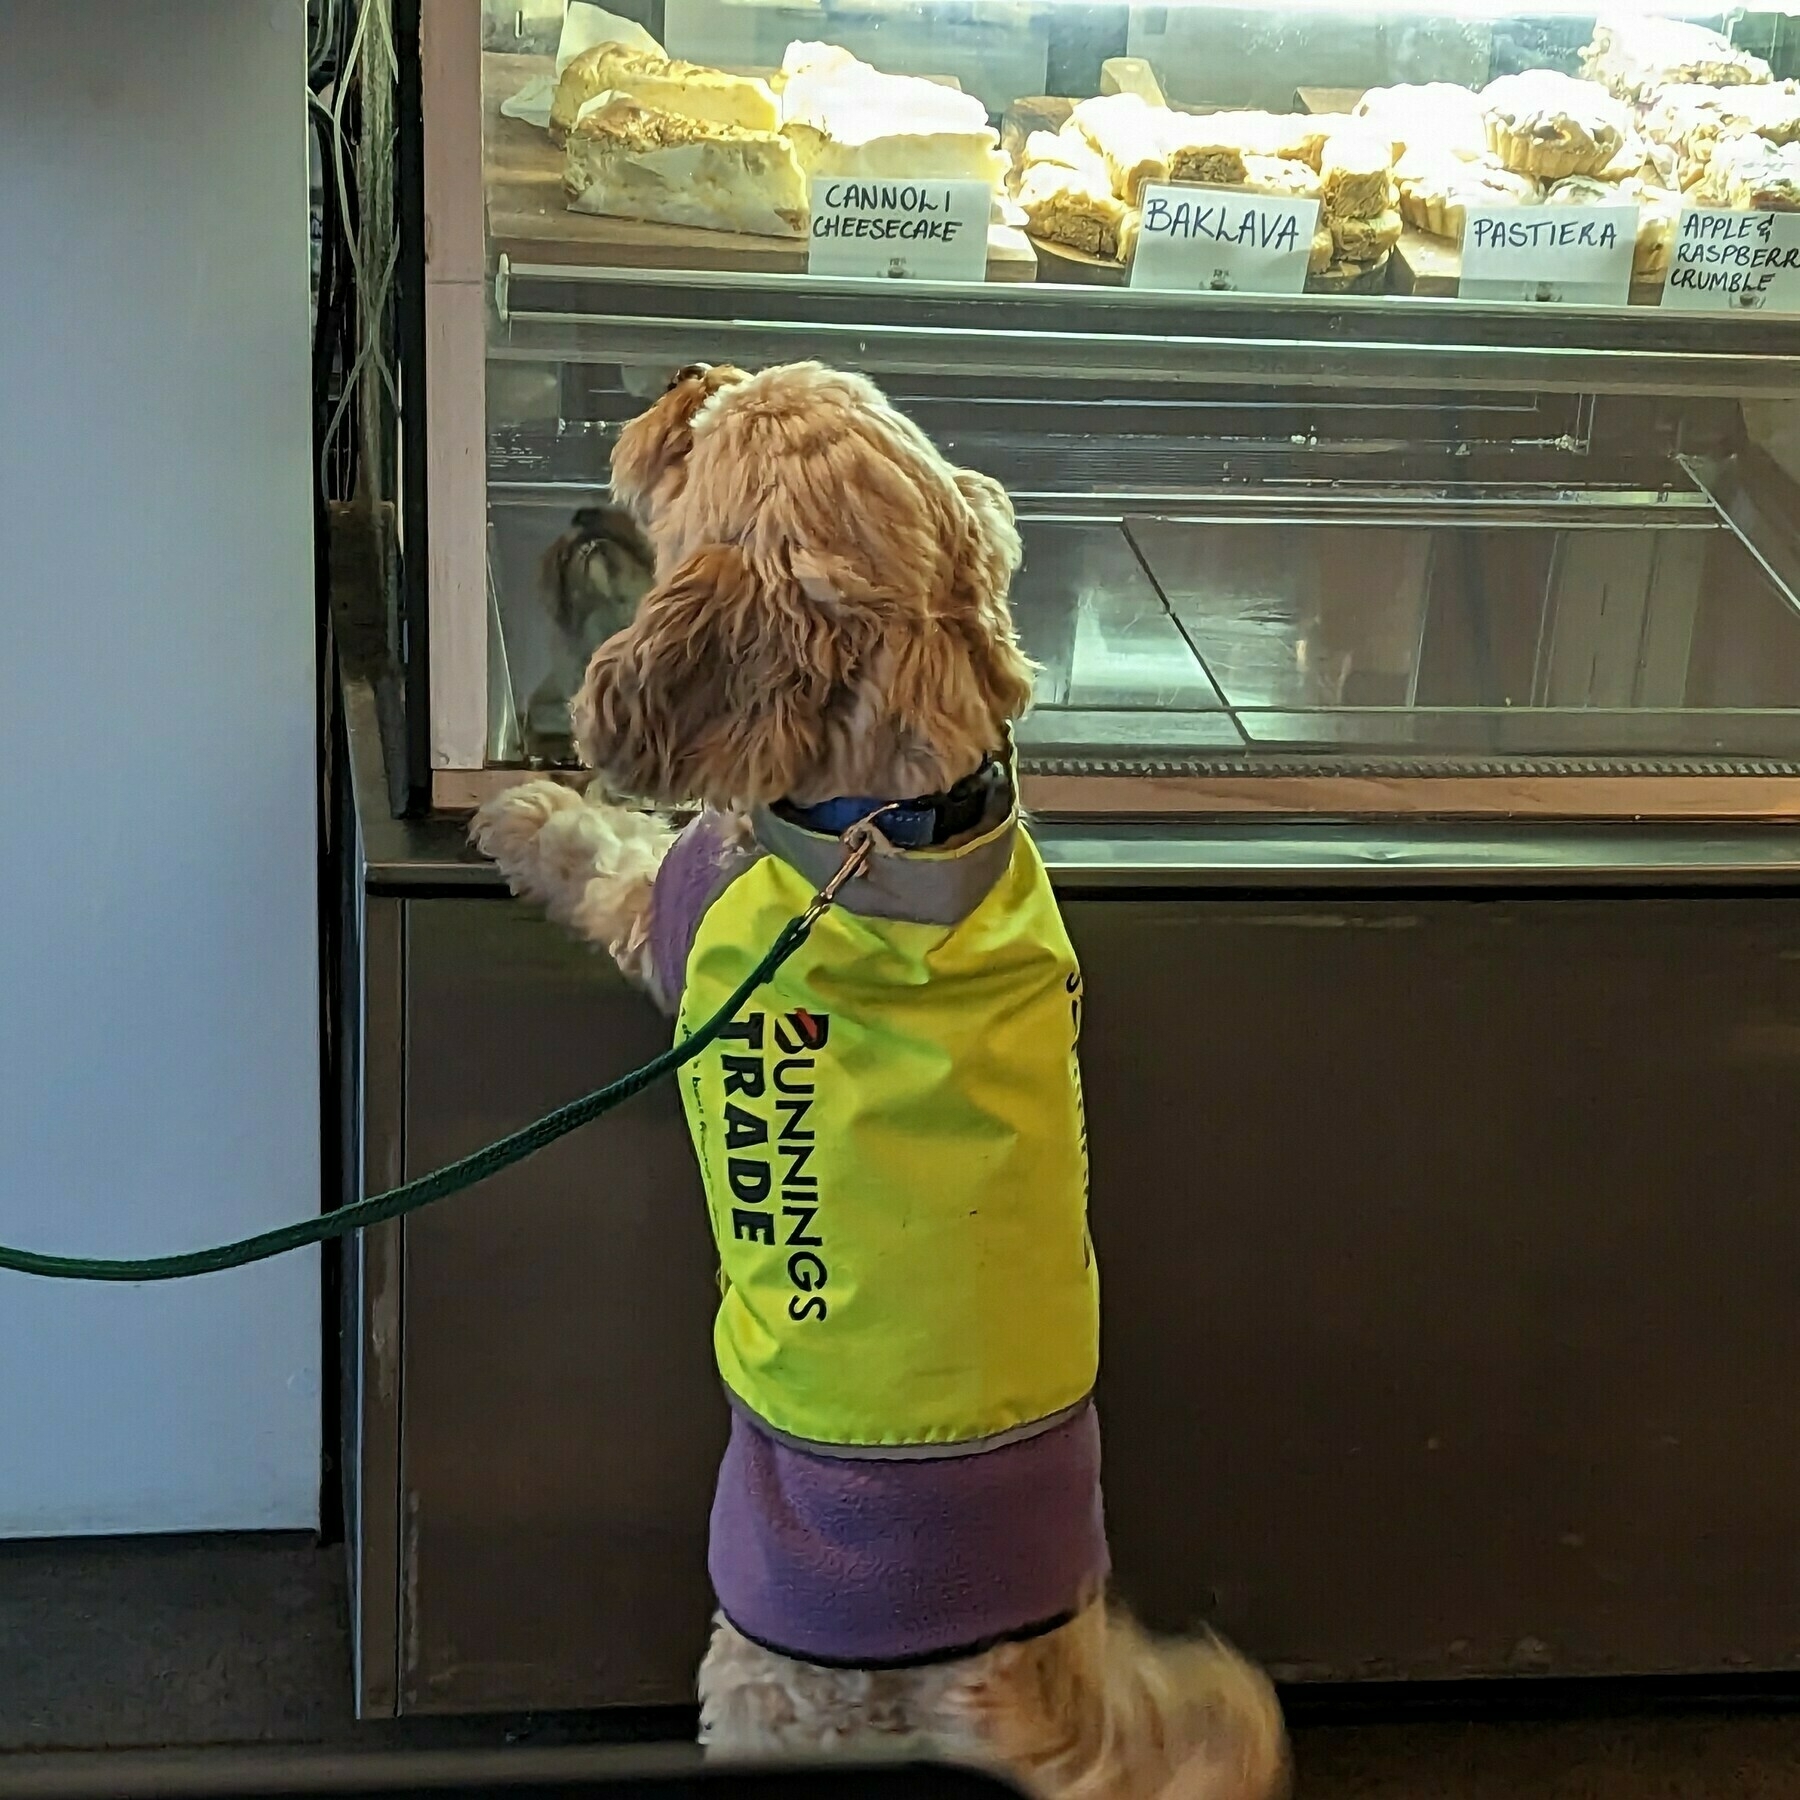 Little dog reared up with front paws on a low ledge of a glass cabinet holding cakes.